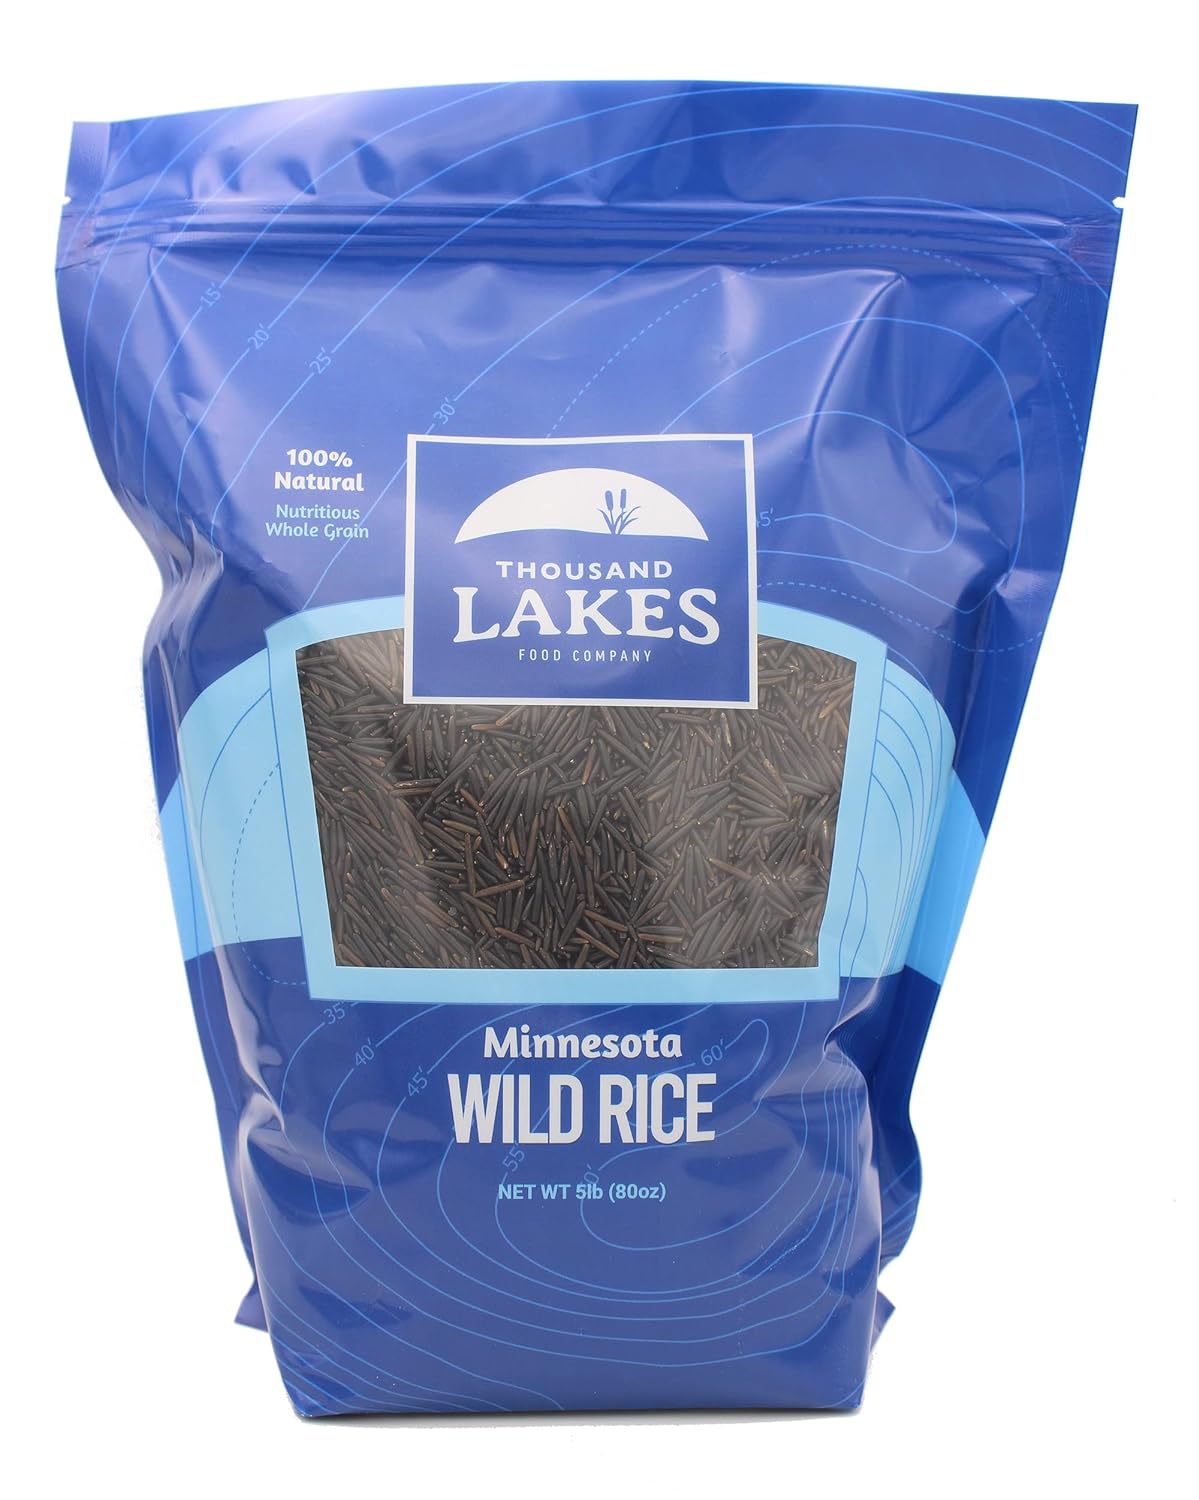 I had forgotten about wild rice but remembered recently and ordered this bag. Made some today and it was delicious. I'm focused on getting plenty of potassium in easy to consume food sources and this sure fits the bill, along with loads of other minerals and nutriments.I don't know the glycemic index but I can eat close to two cups at a time without getting the sleepies. Wild rice has the 2nd highest protein to carb ration after oats.